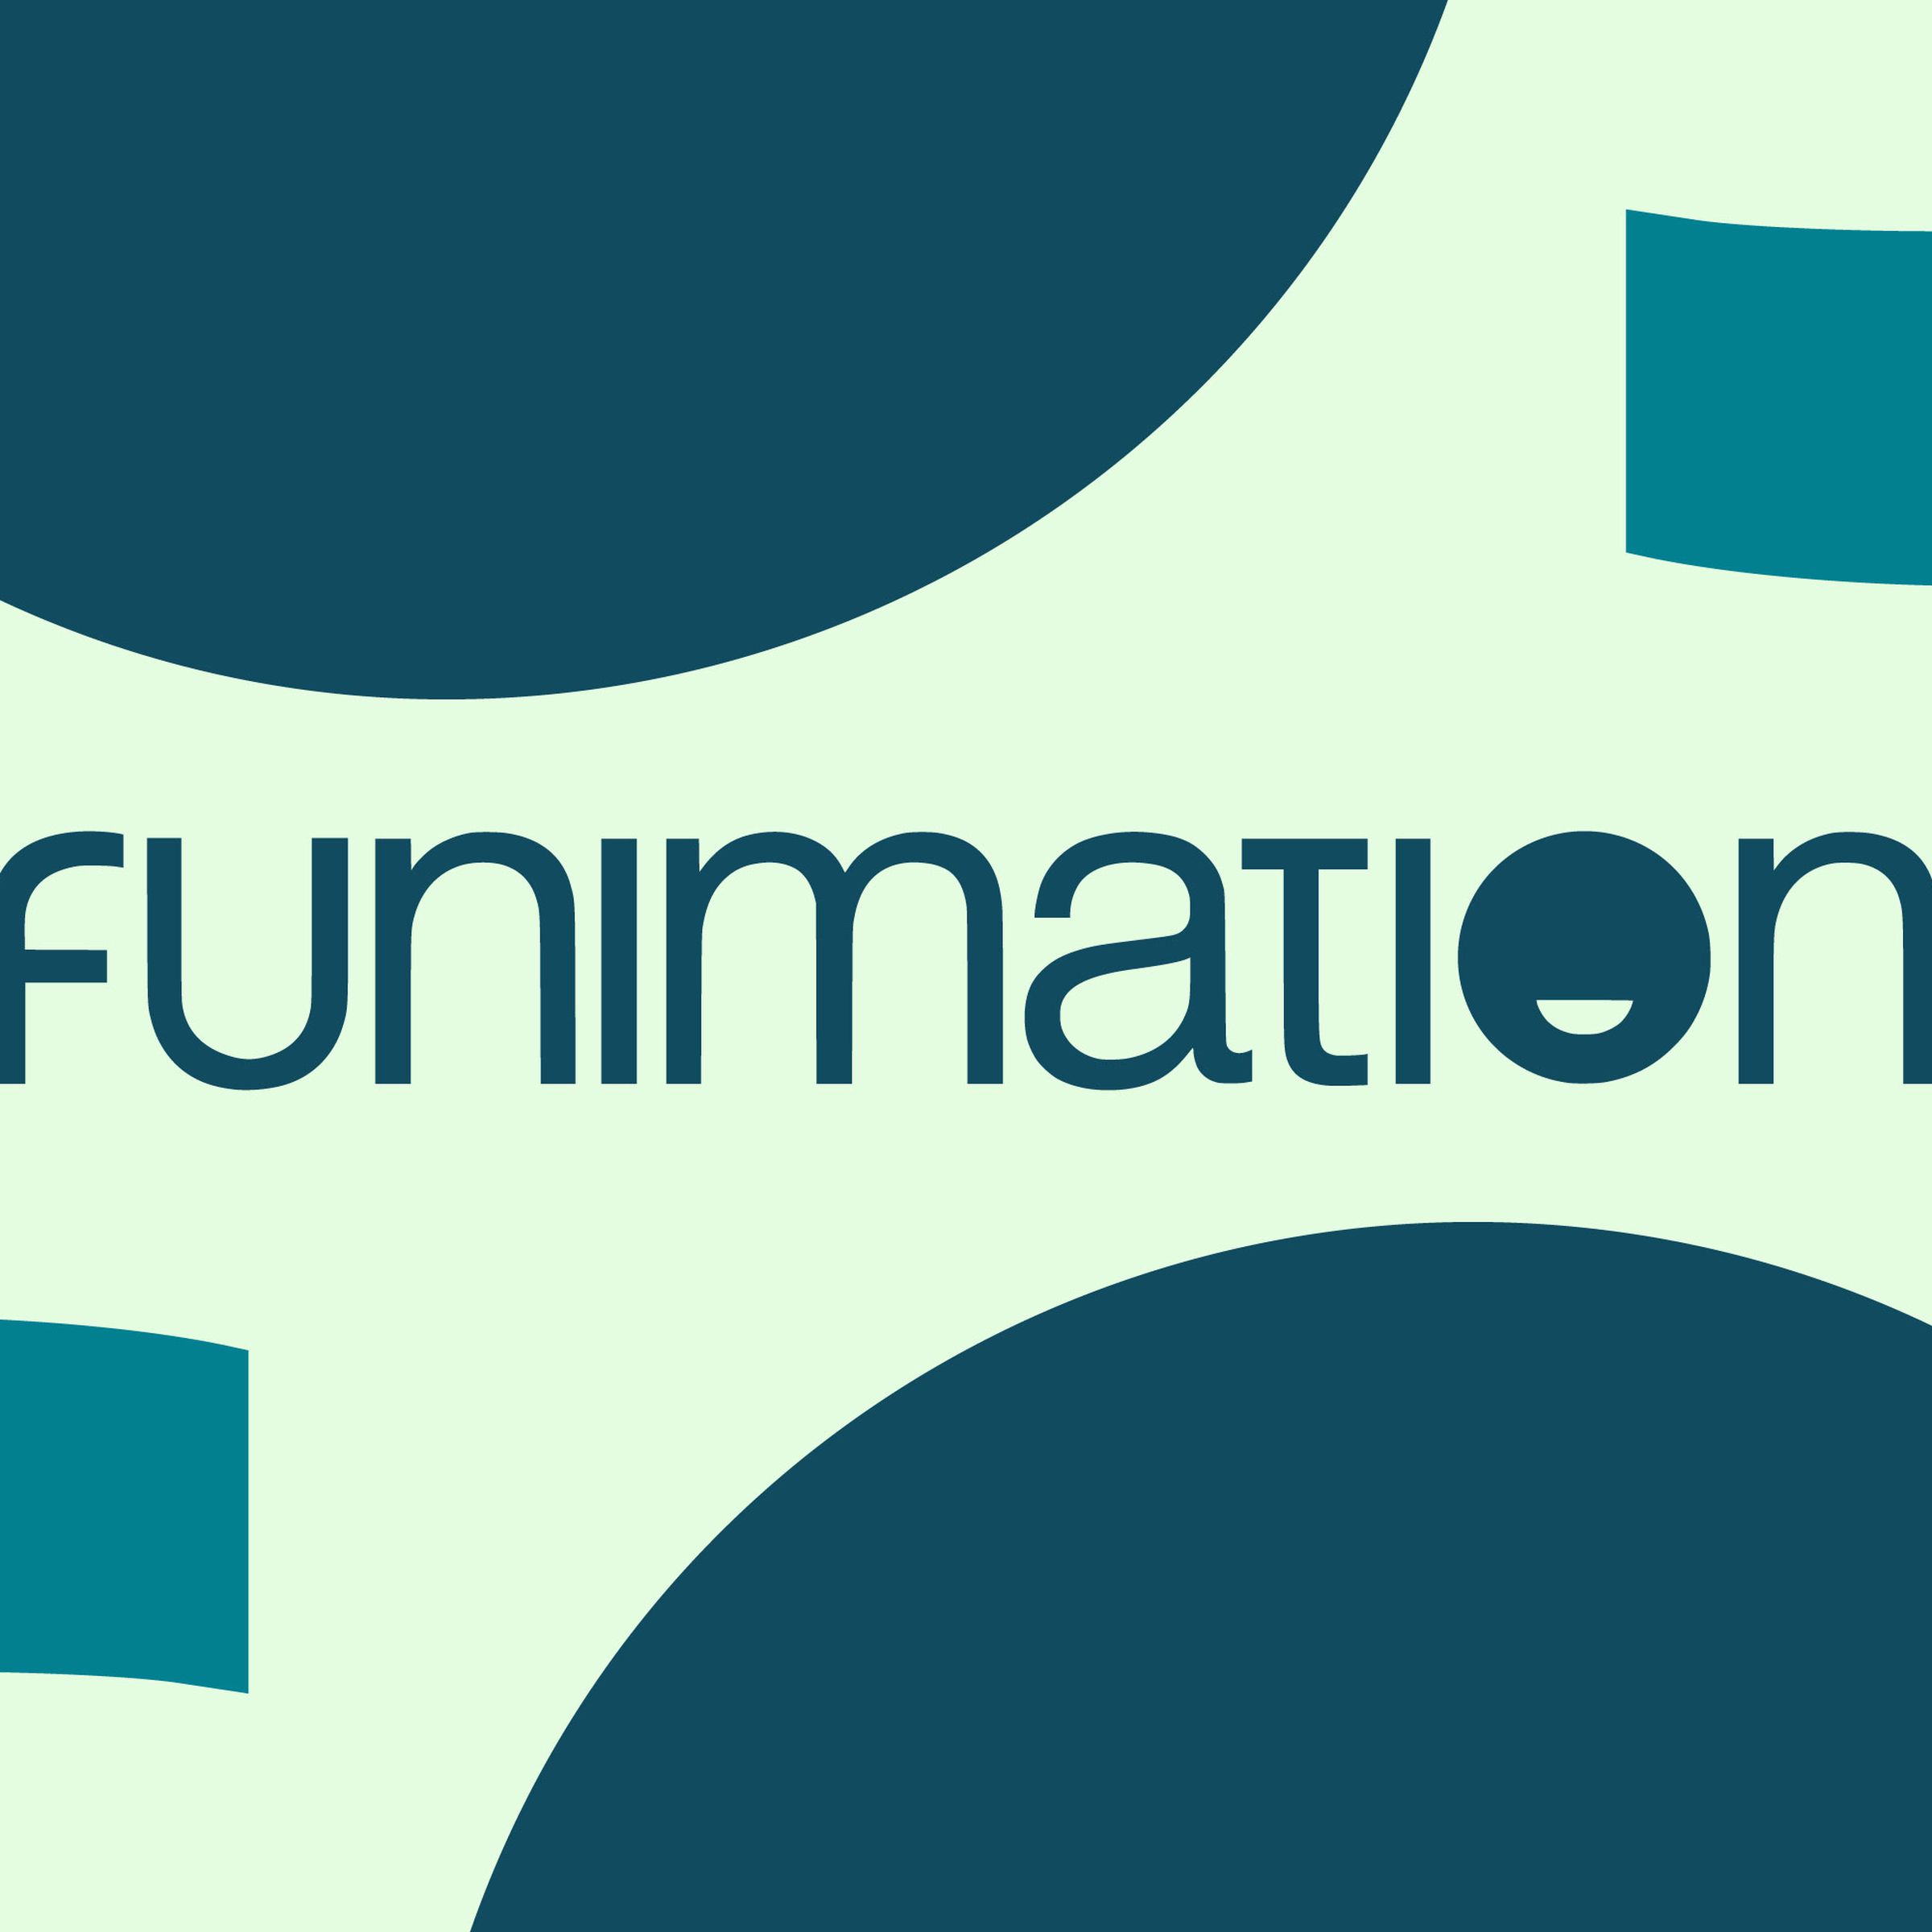 Graphic of the Funimation logo in green on a light green background surrounded by large green circles and shapes